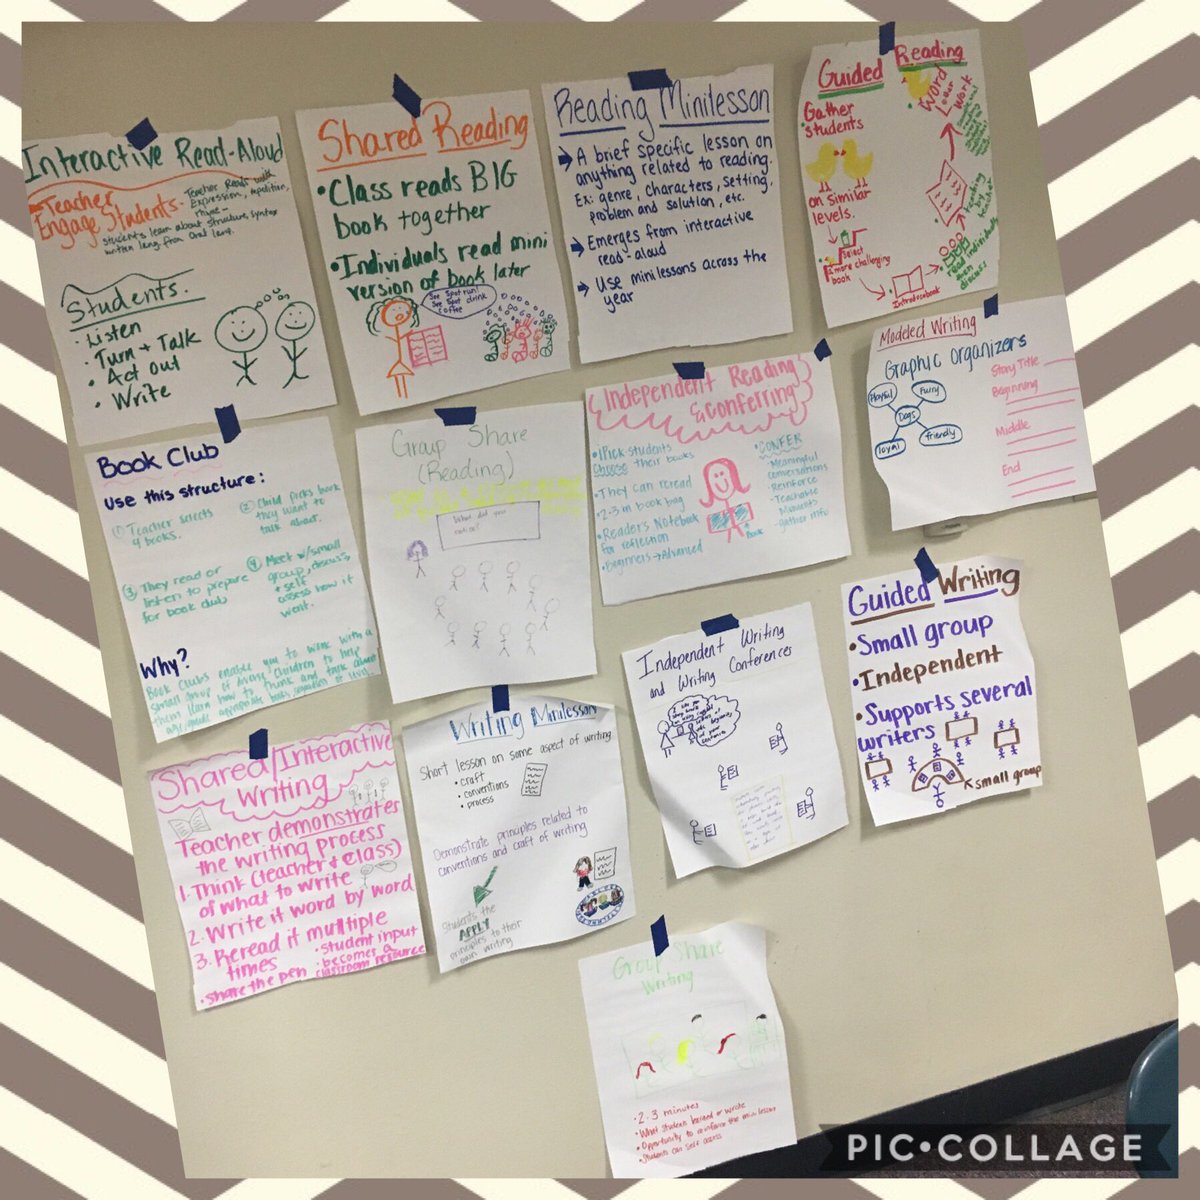 Evidence of our learning today!! Great work 2nd grade Team! #ceroars #AVCato #jje #literacy4all=#learning4all #castleberryisd